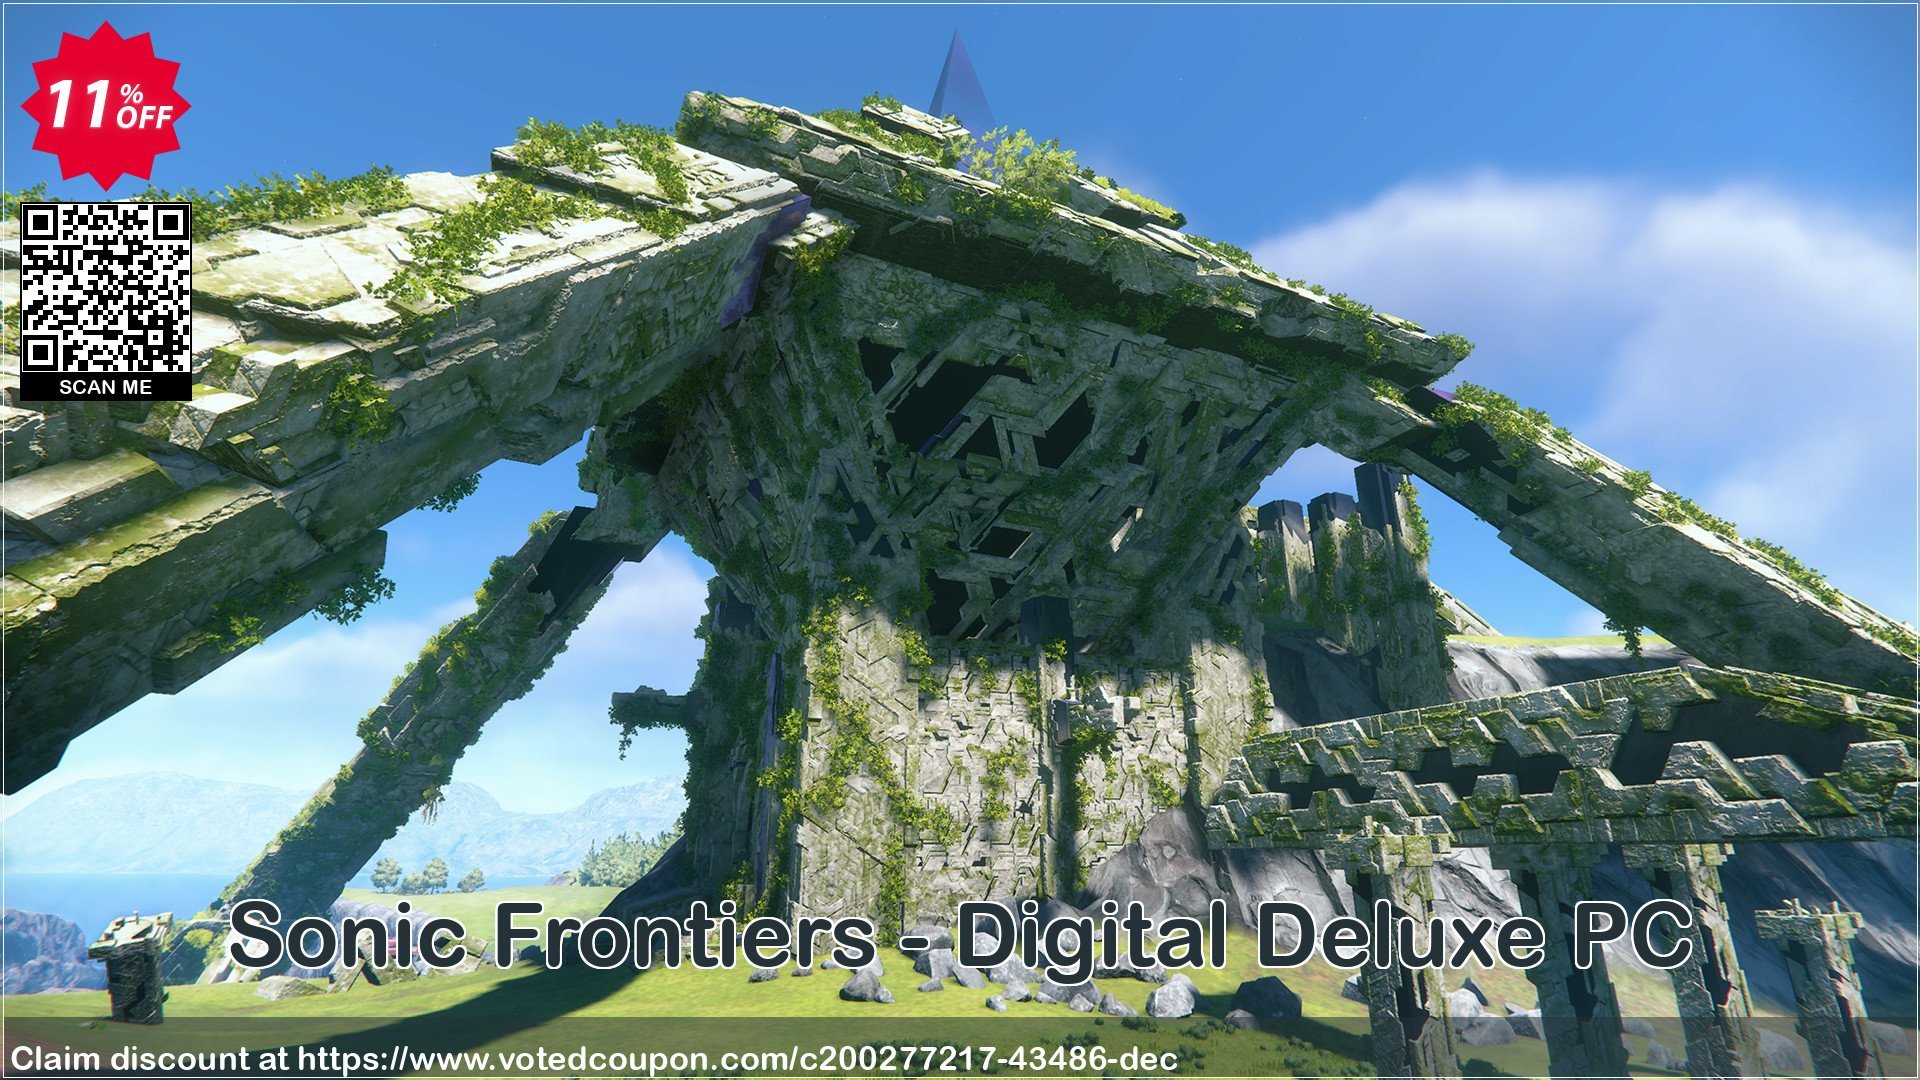 Sonic Frontiers - Digital Deluxe PC Coupon Code May 2024, 11% OFF - VotedCoupon